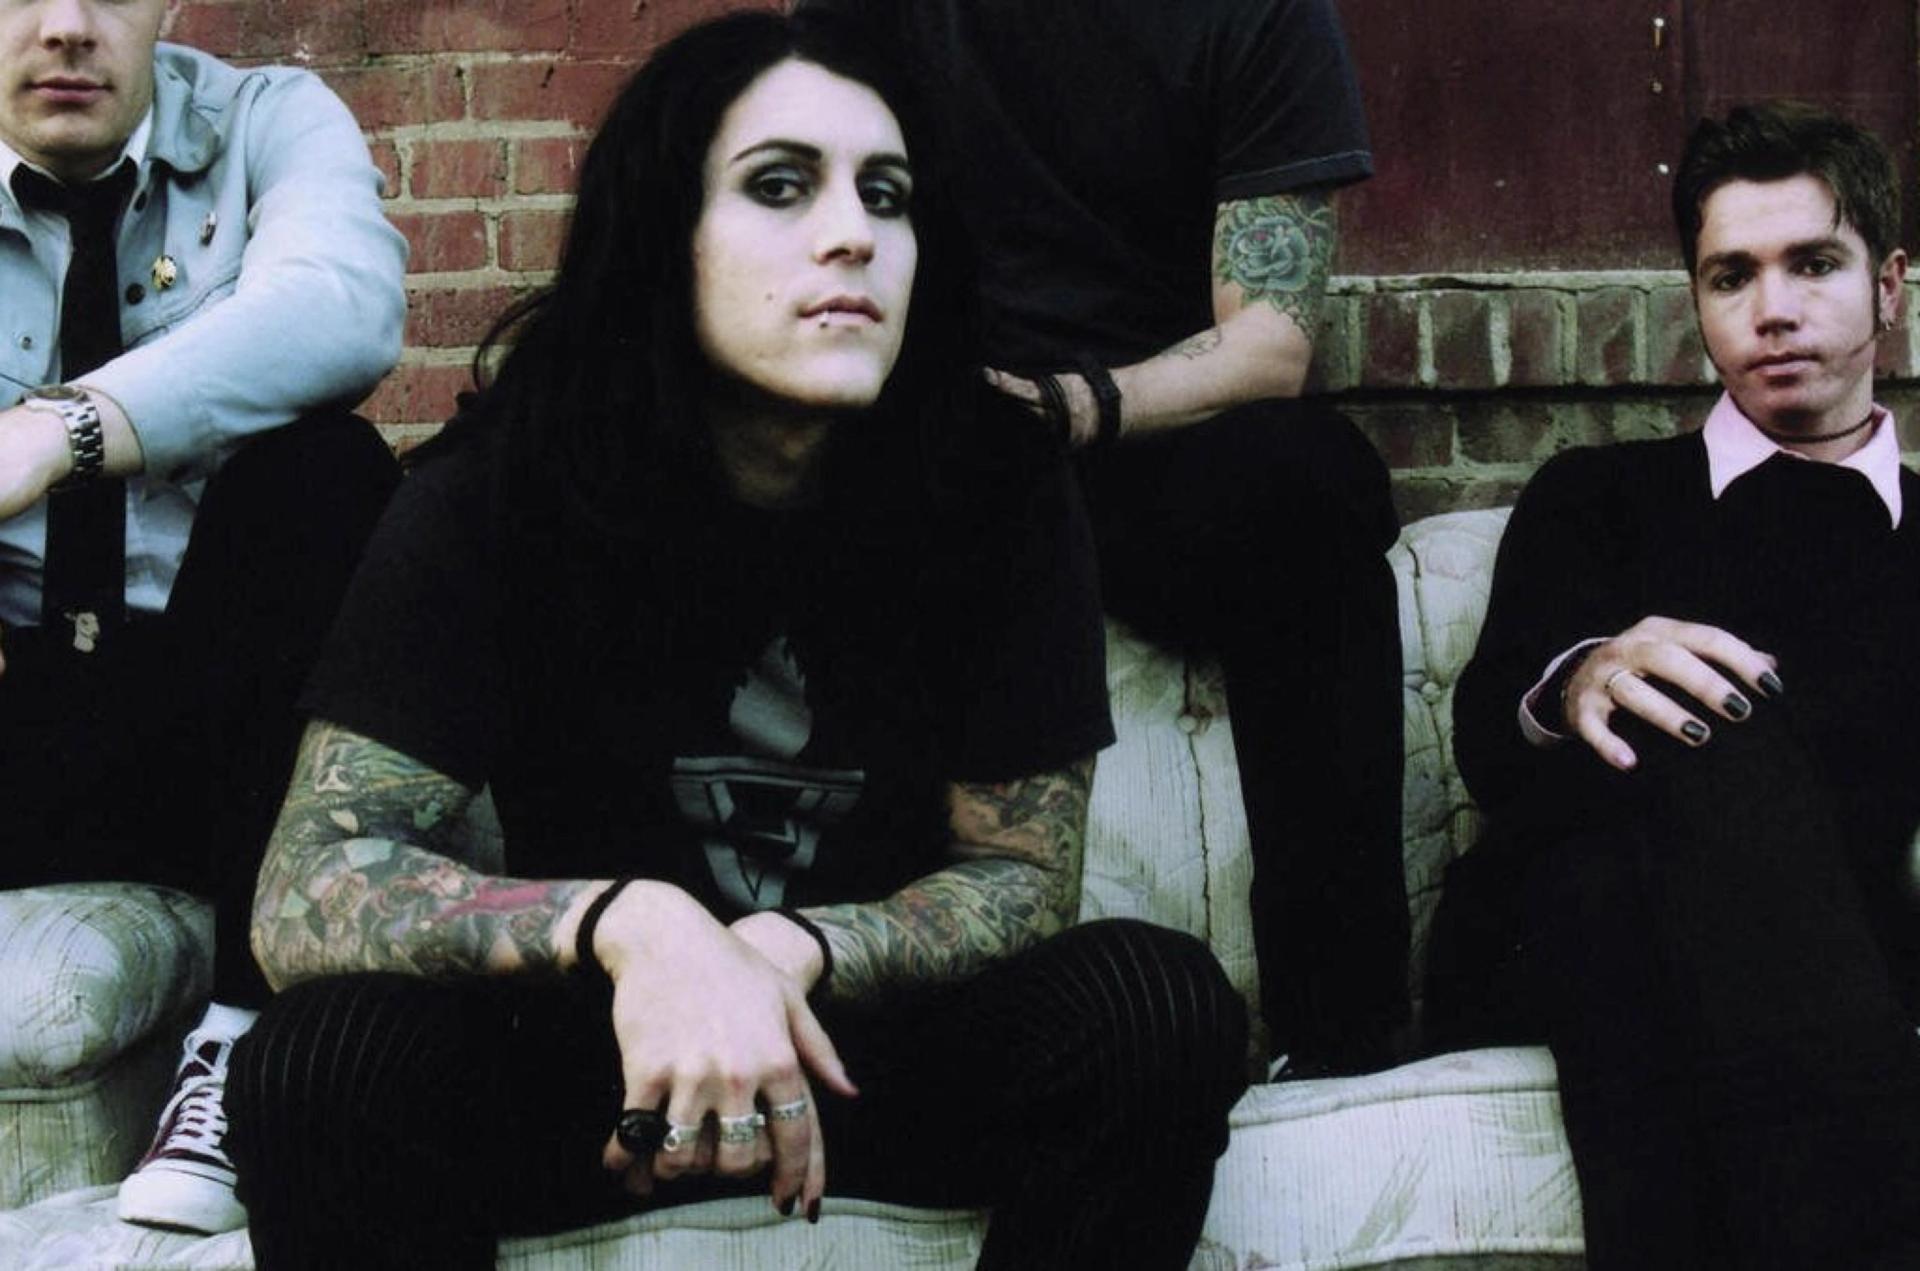 An AFI promotional photograph from the early 2000s. Davey Havok is pictured sitting center. Courtesy Nitro Records.